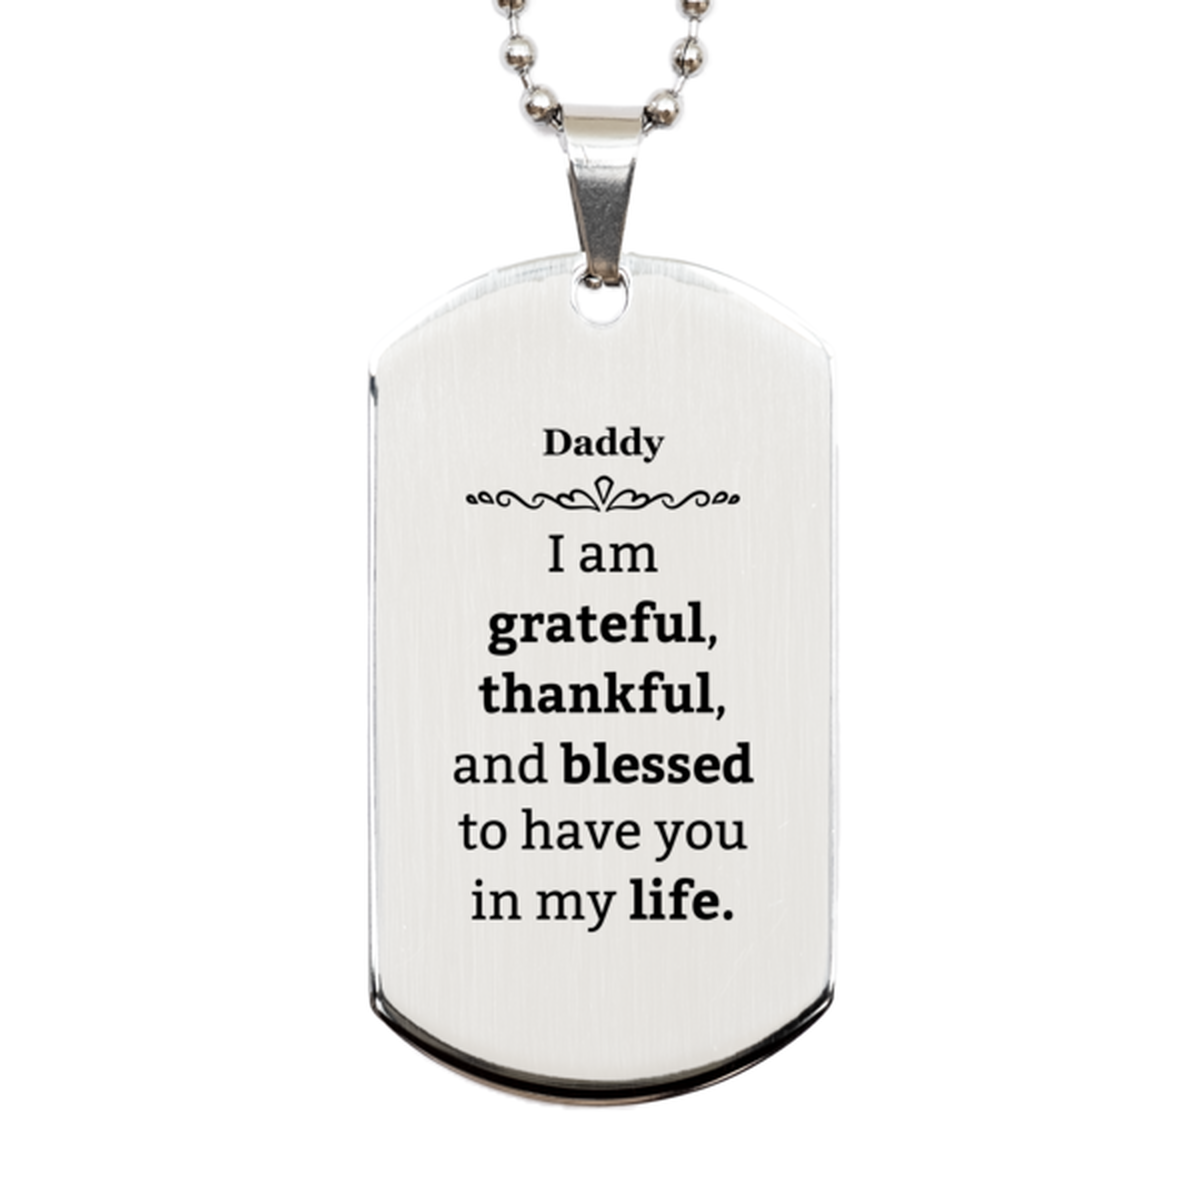 Daddy Appreciation Gifts, I am grateful, thankful, and blessed, Thank You Silver Dog Tag for Daddy, Birthday Inspiration Gifts for Daddy